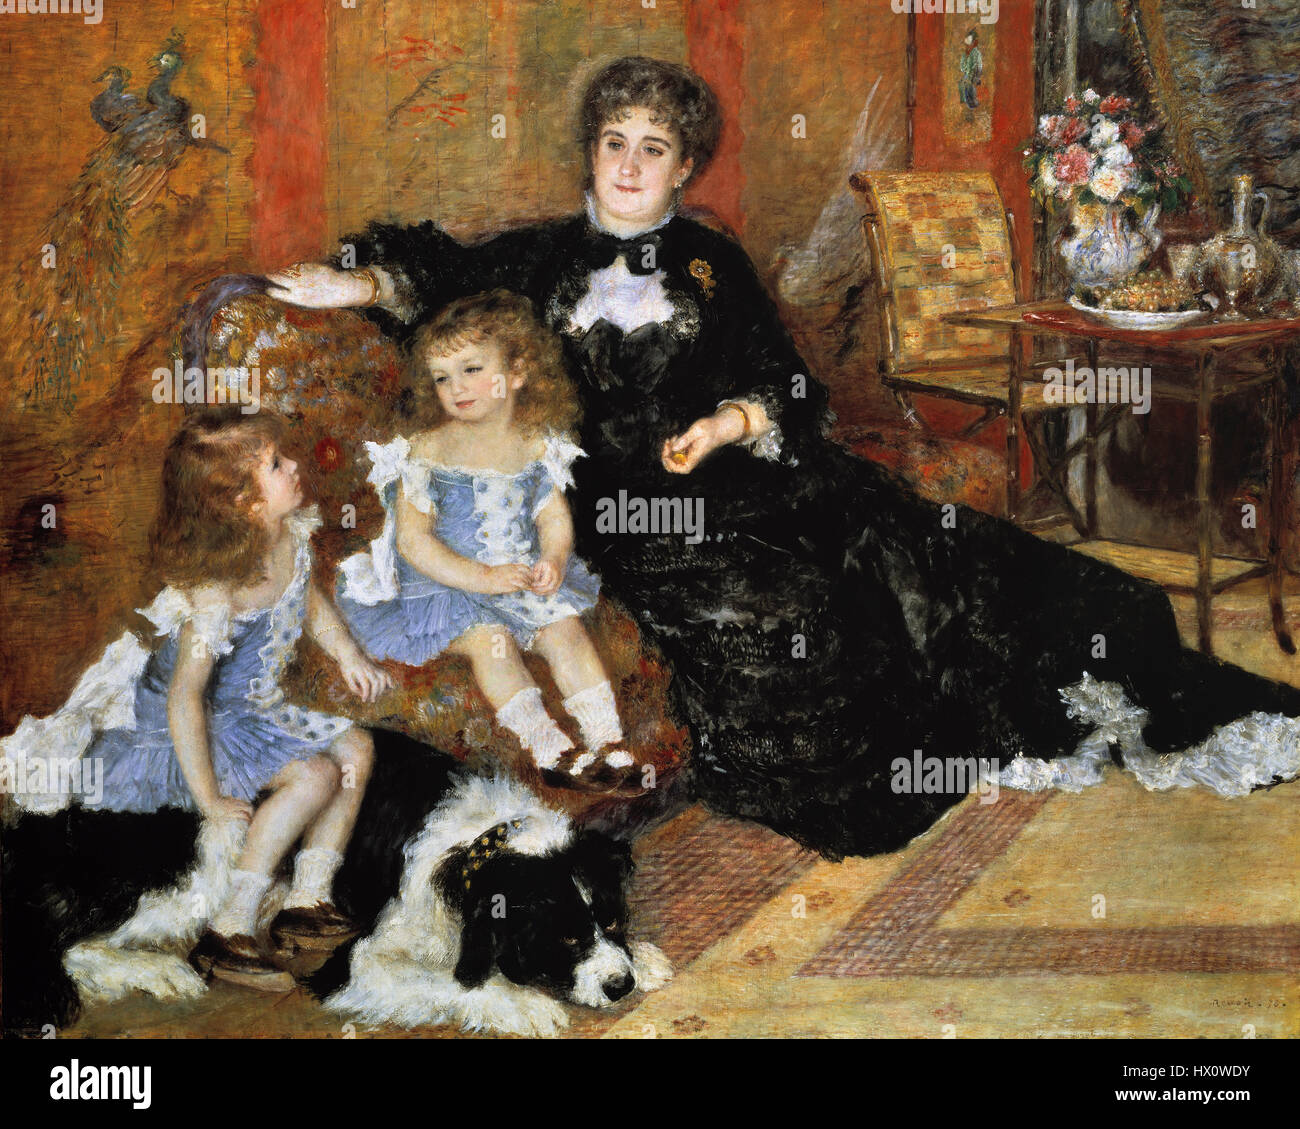 Auguste Renoir (1841-1919). French artist. Madame Georges Charpentier (Marguerite-Louise Lemonnier, 1848-1904) and her children, Georgette-Berthe (1872-1945) and Paul-Emile-Charles (1875-1895). 1878. Oil on canvas. Metropolitan Museum of Art. New York. United States. Stock Photo